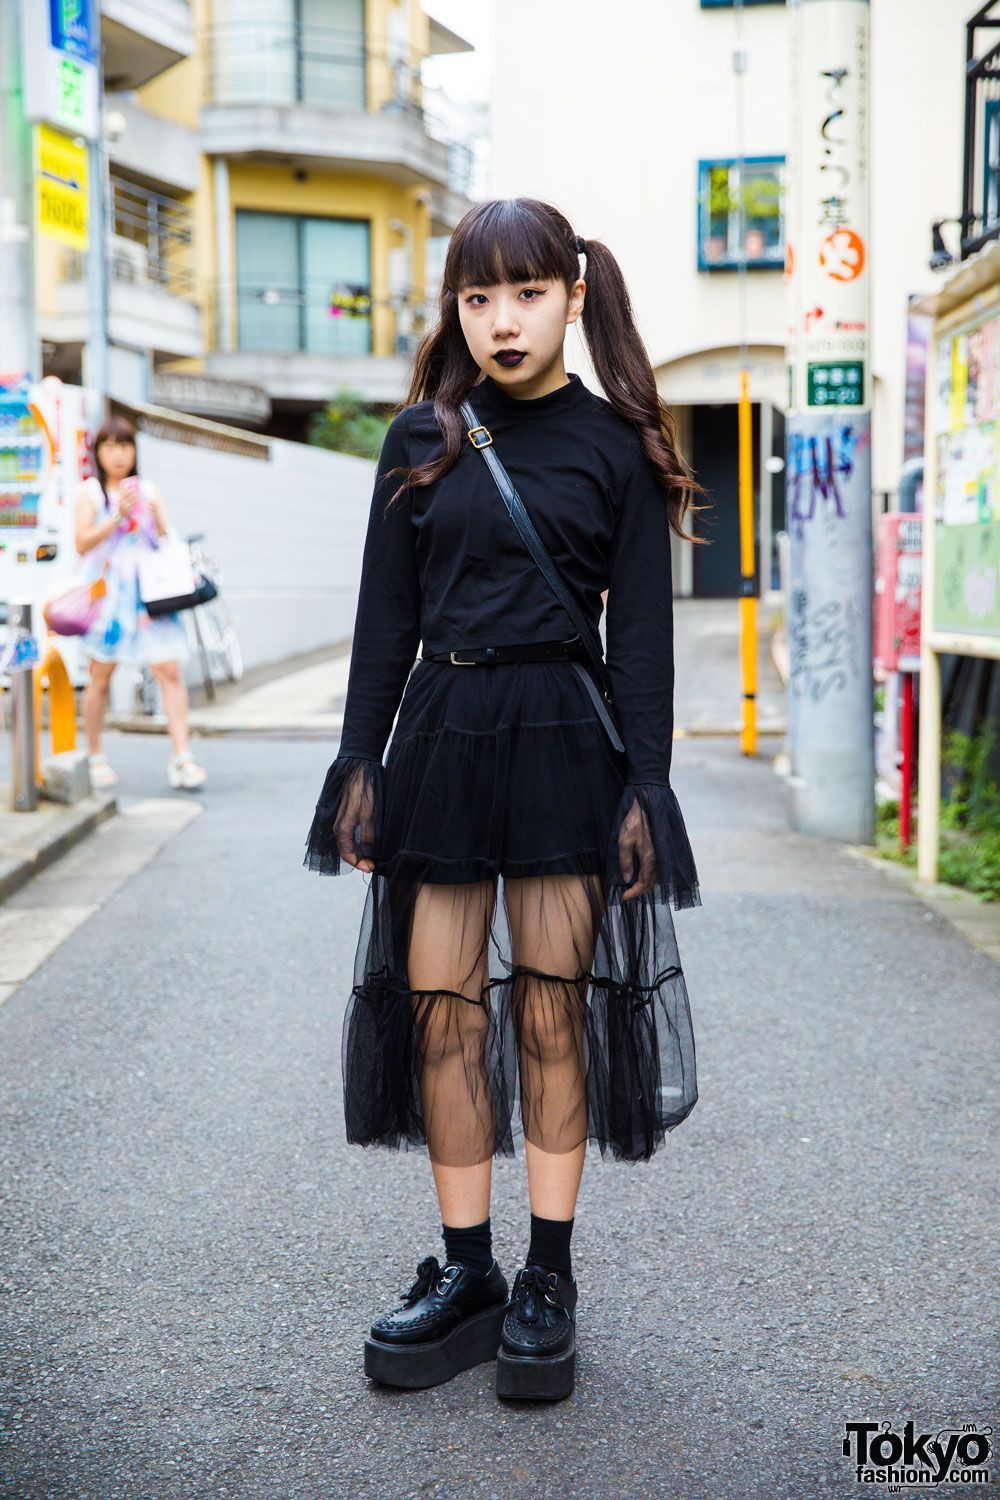 17 year old japanese high schooler: Street Style,  Japanese Street Fashion,  Creepers Outfits  